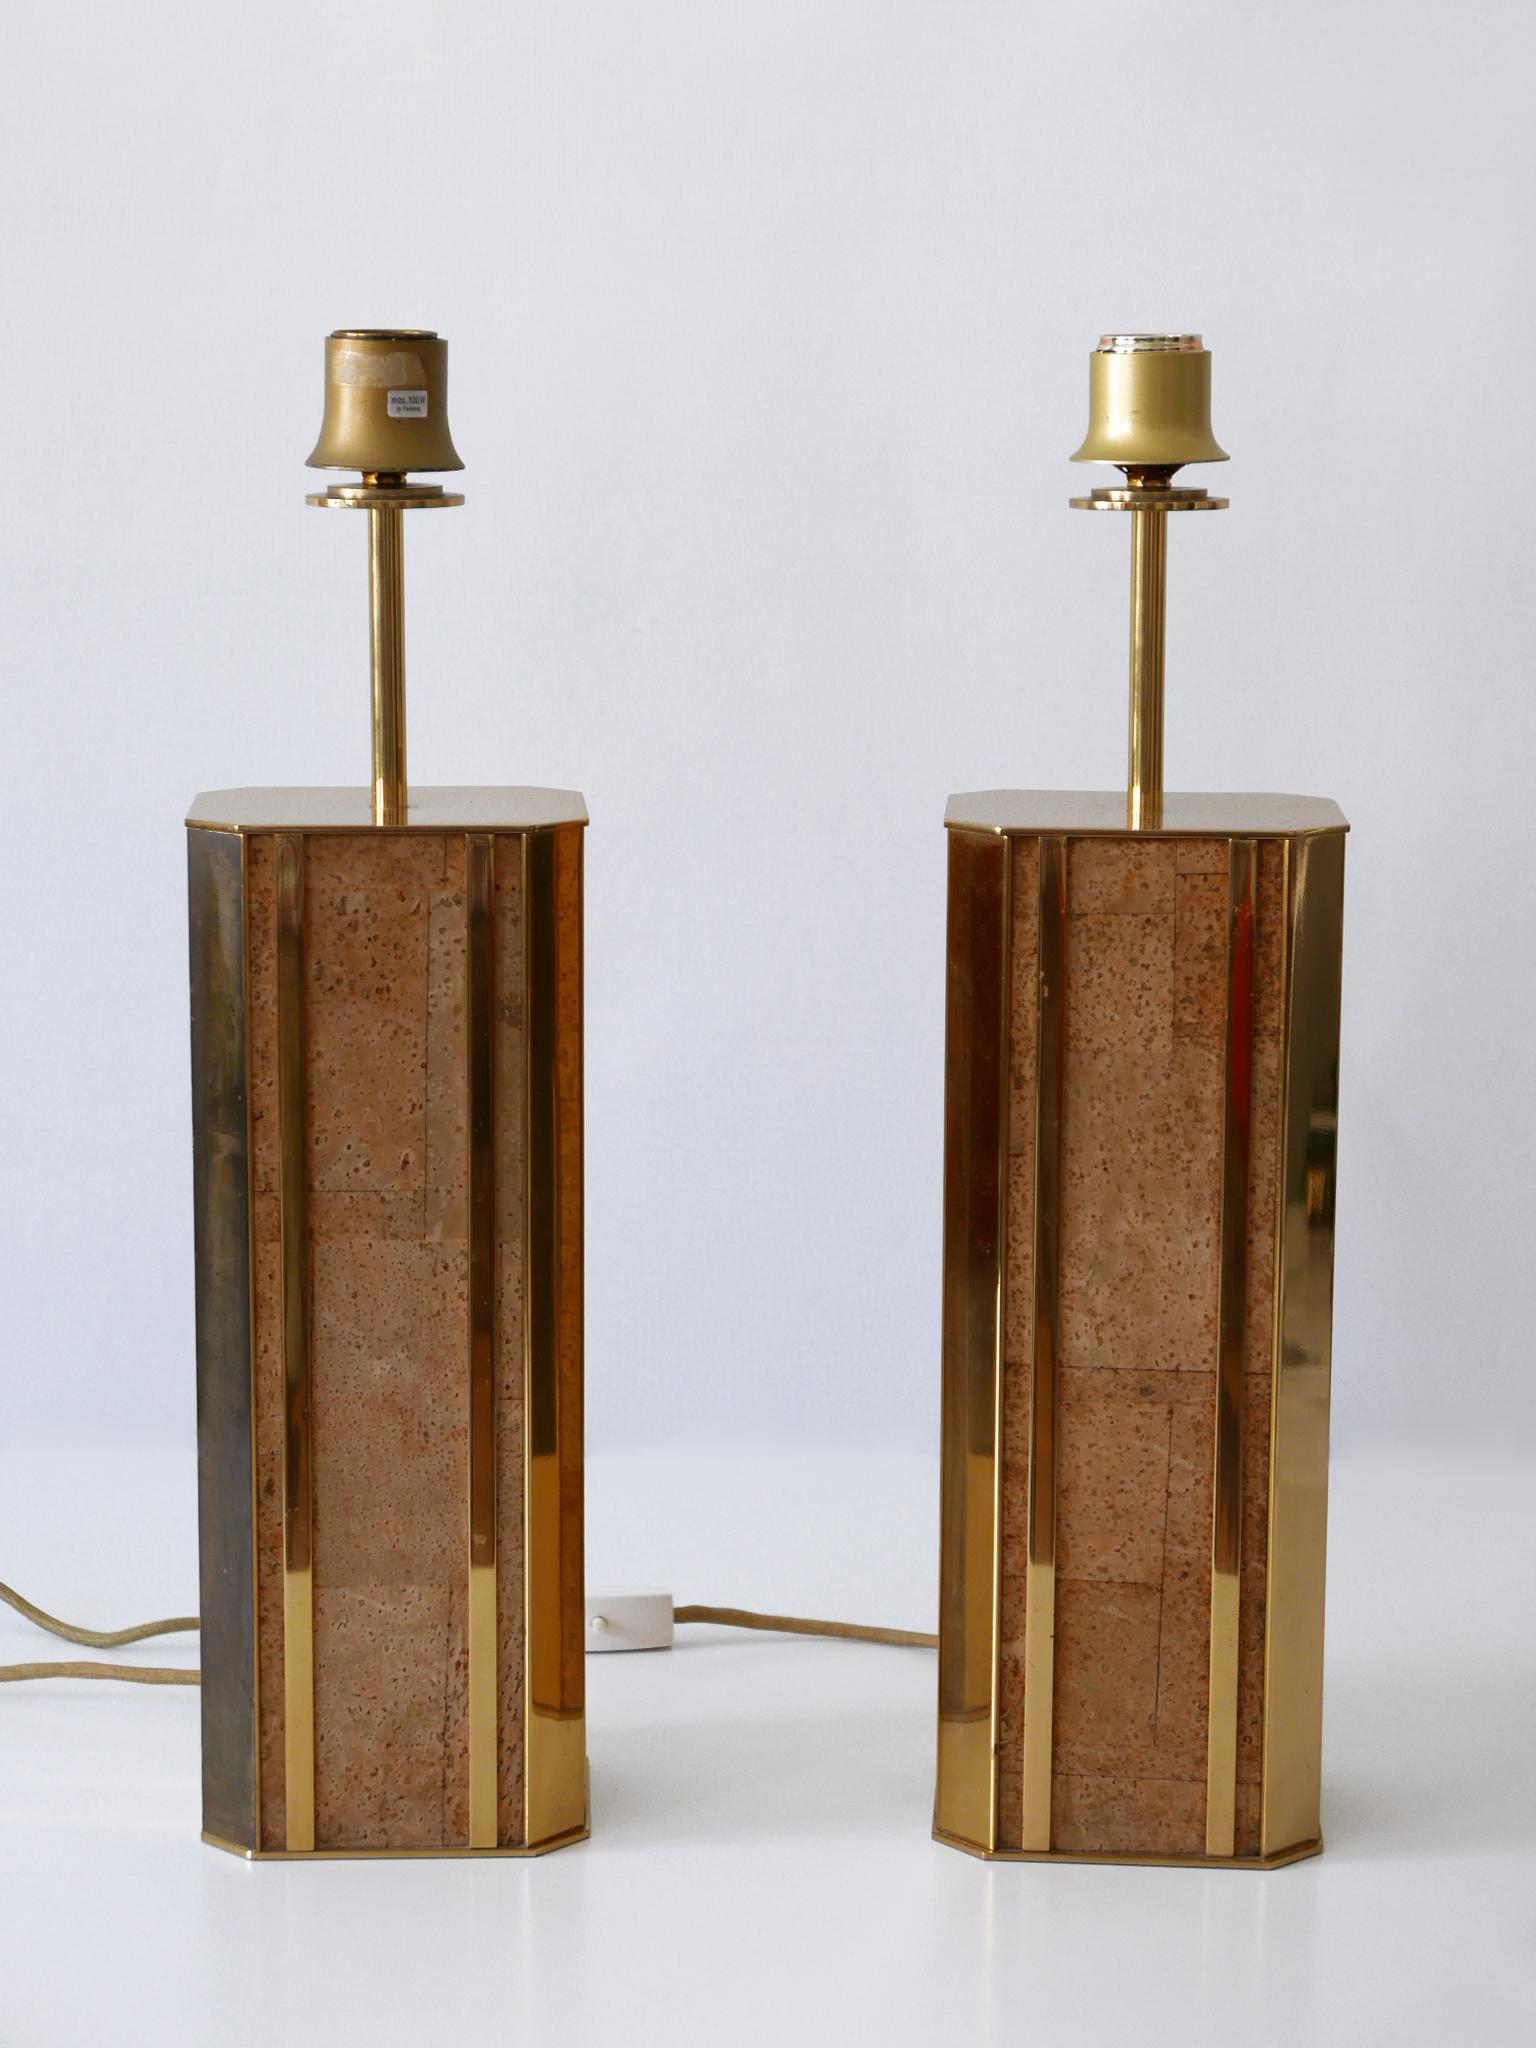 Set of two monumental and extremely rare Mid-Century Modern table lamps in heavy, massive brass and cork. Designed and manufactured by Vereinigte Werkstätten, 1960s, Germany.

These sculptural table lamps are executed in massive brass and cork. Each